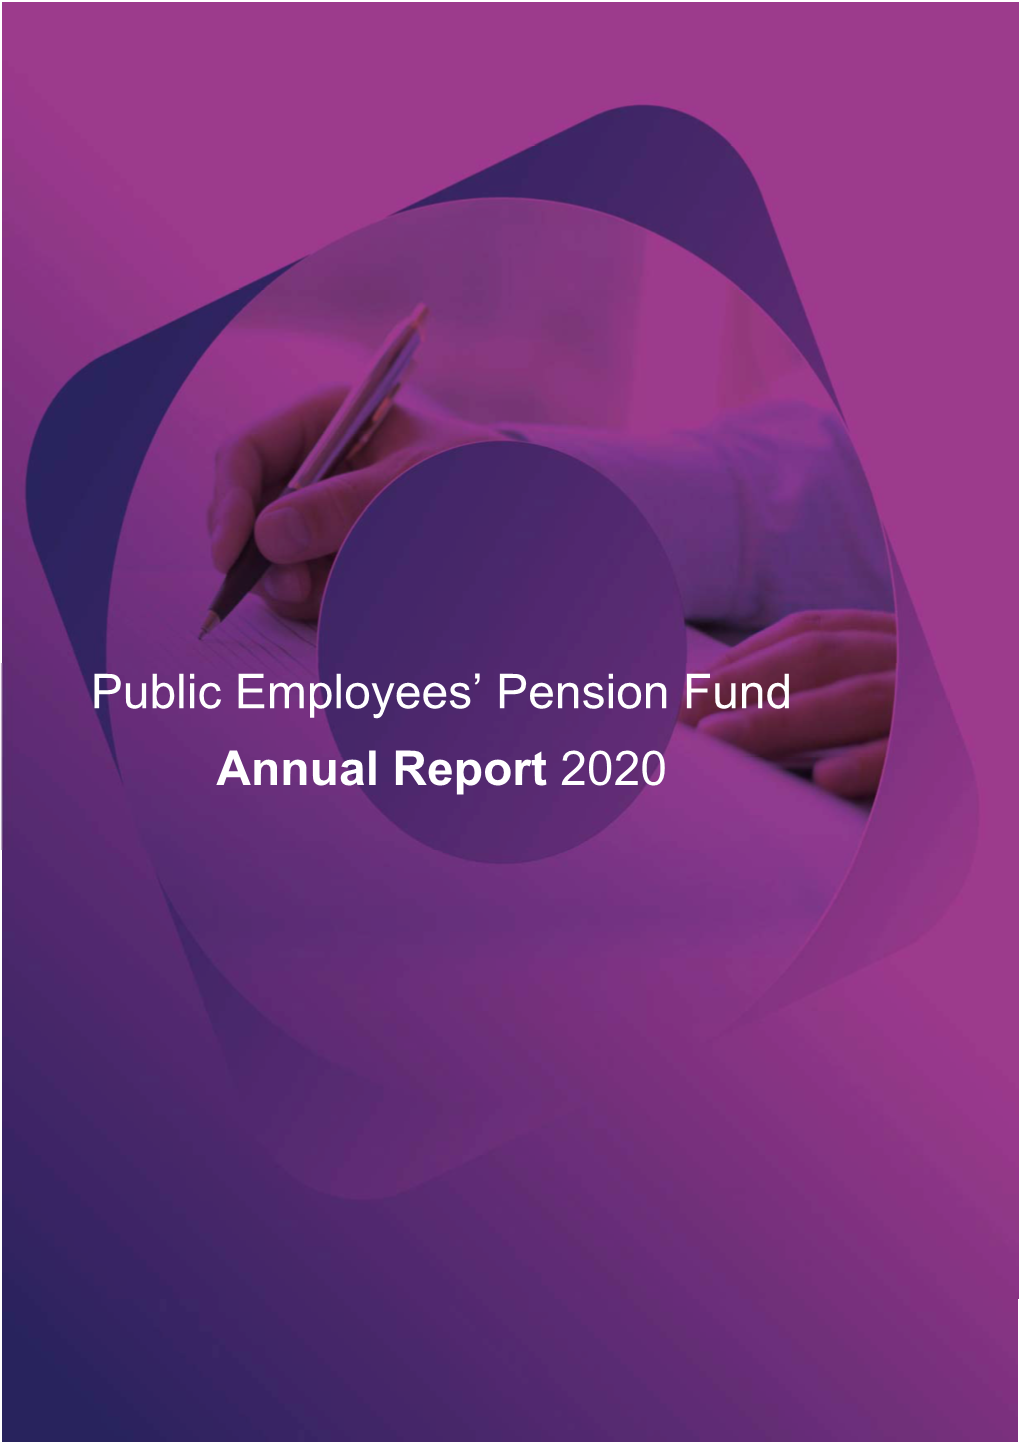 Public Employees' Pension Fund Annual Report 2020